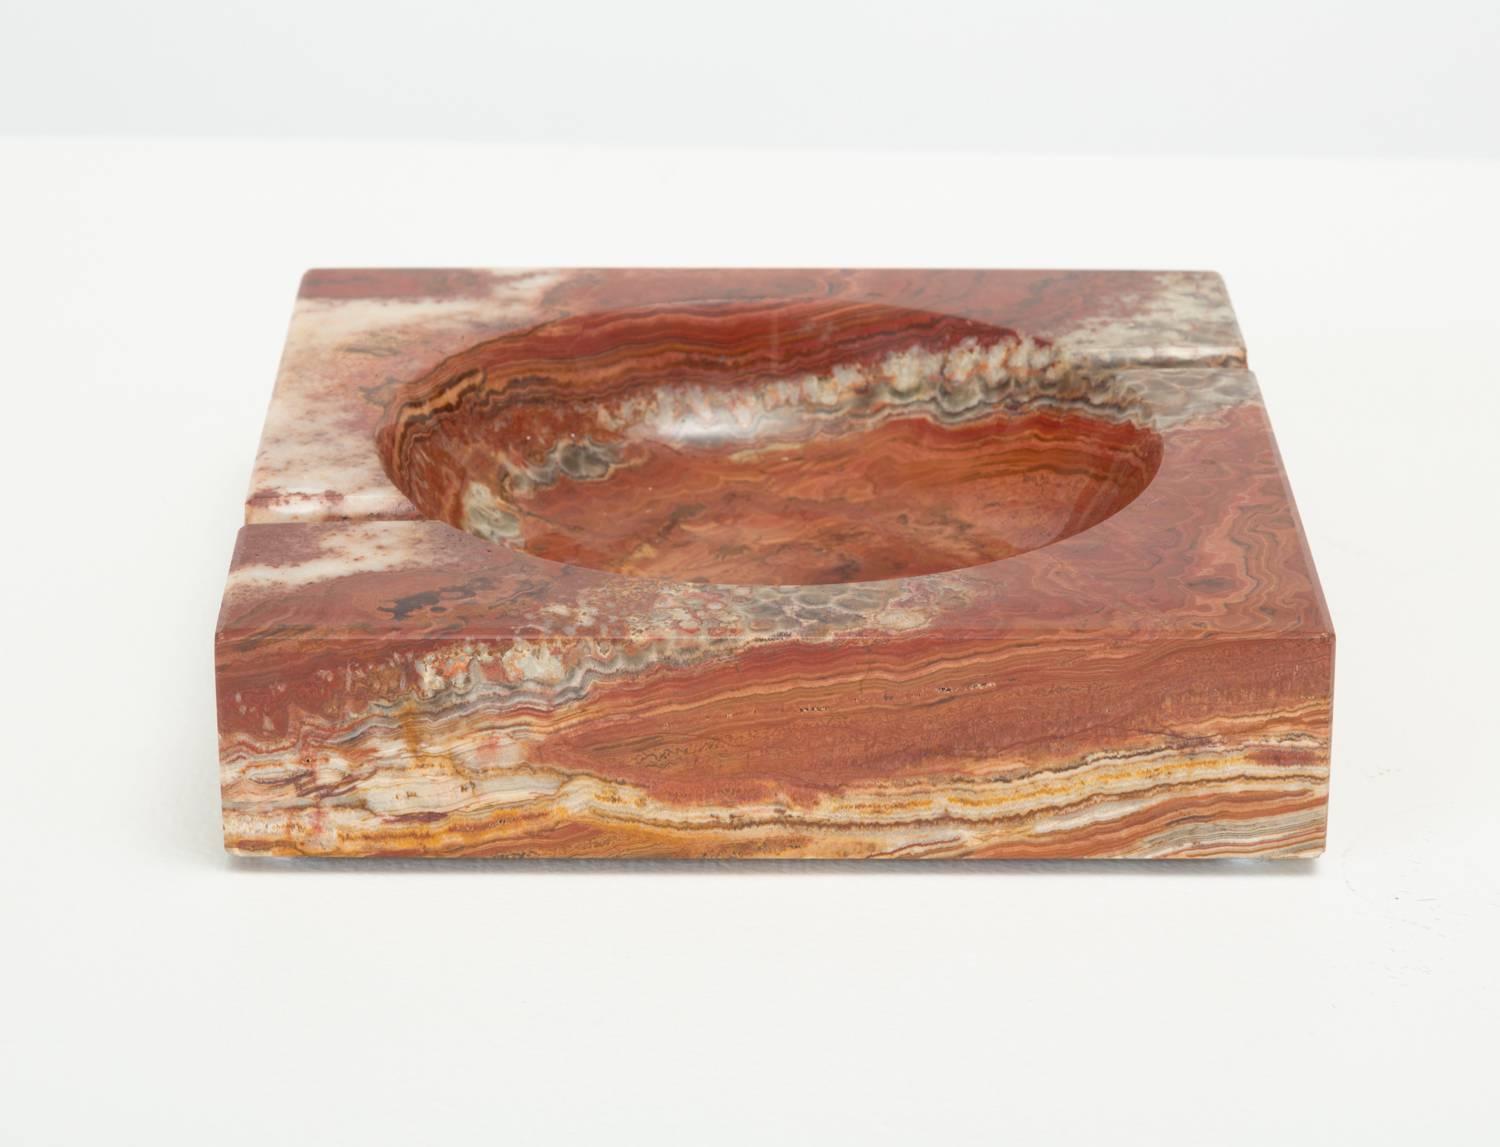 A square ashtray in a polished red marble with grey and white veining. The piece has a circular well, and two routed indentations perpendicular to its edges. The corners and edges of the face are chamfered and the piece has four felt feet on the